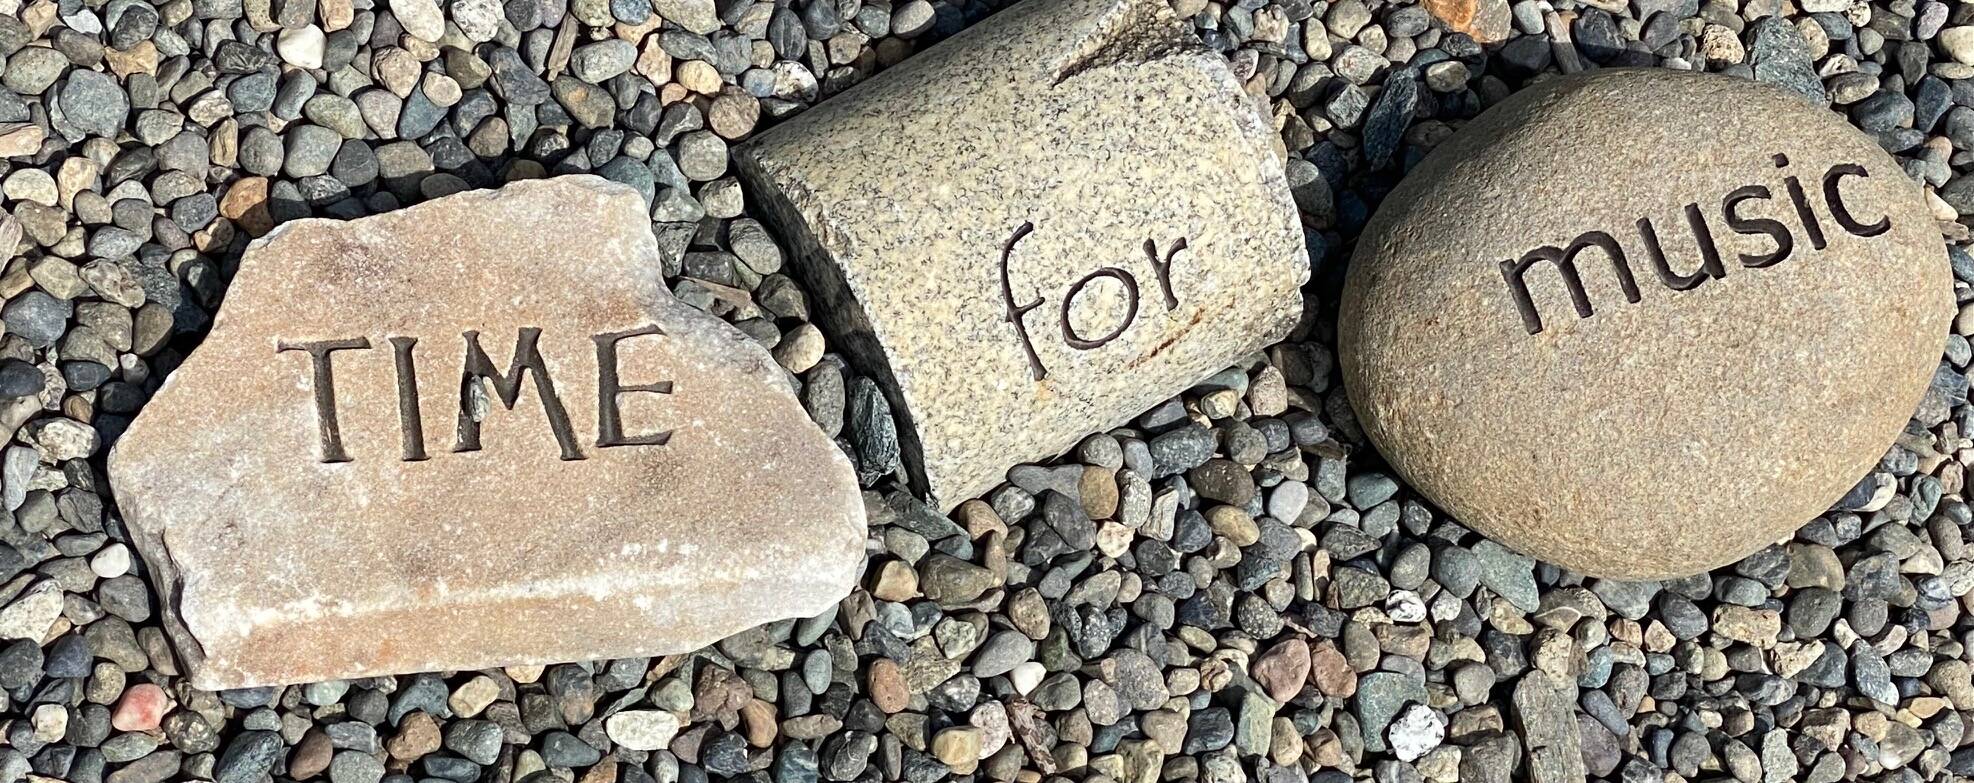 Rock messages for the masses seen at the arboretum on Aug. 5. (Photo by Denise Carroll)